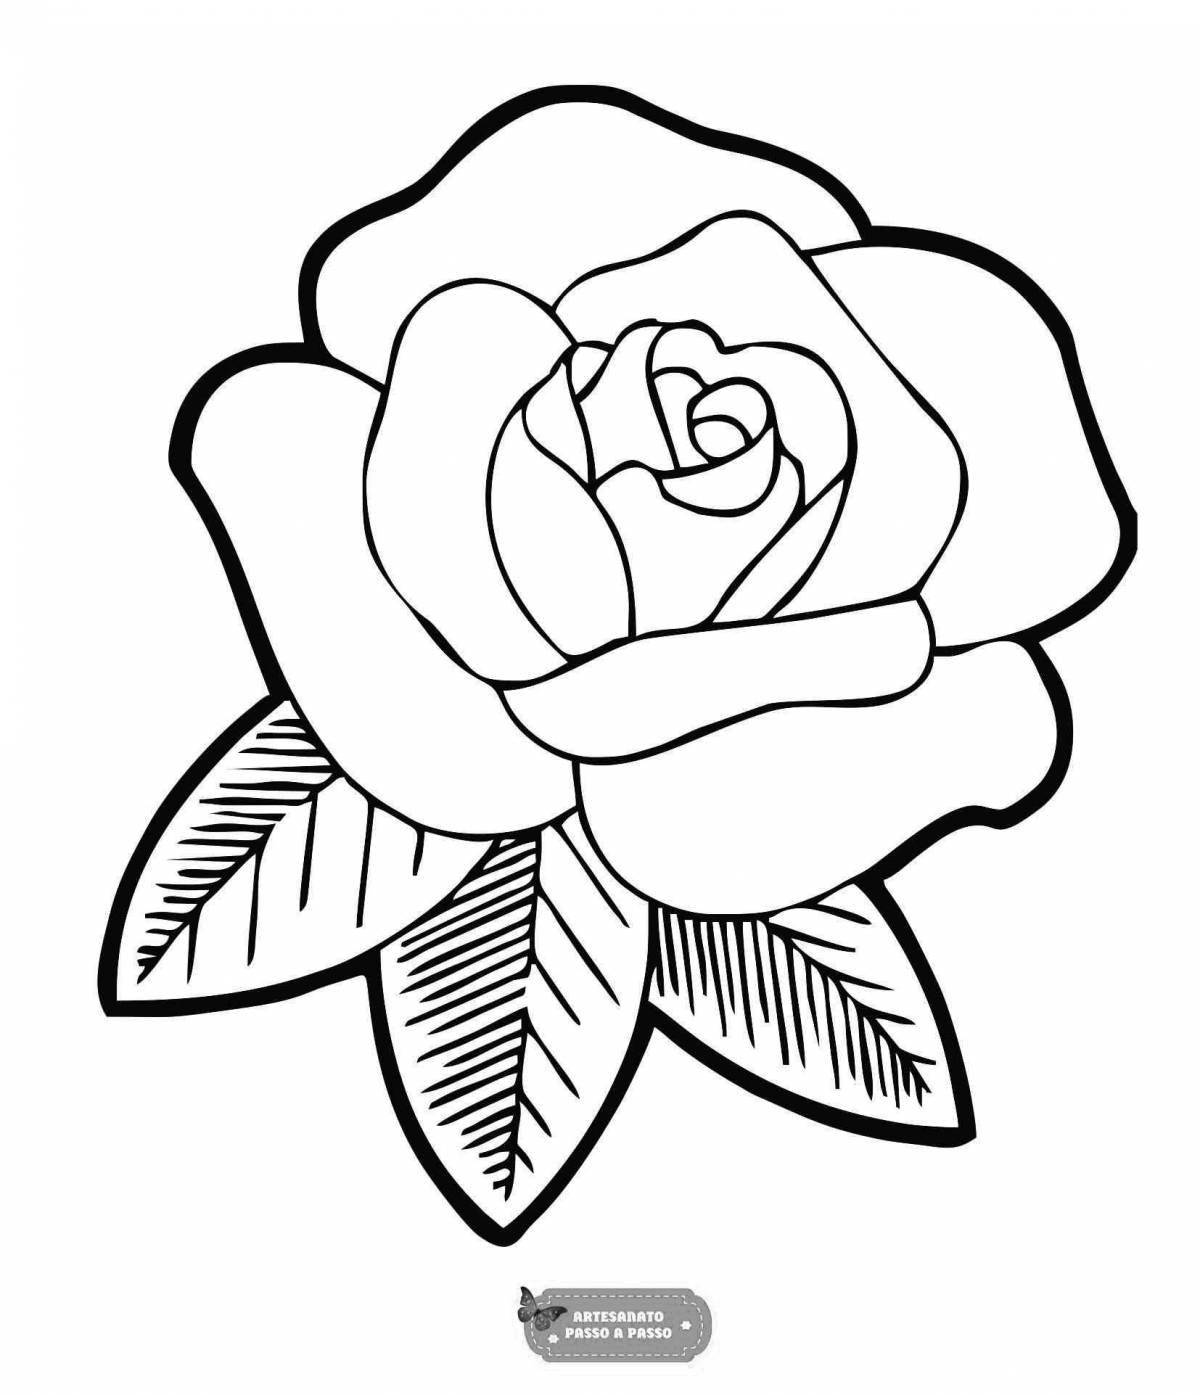 Colorful rose flower coloring book